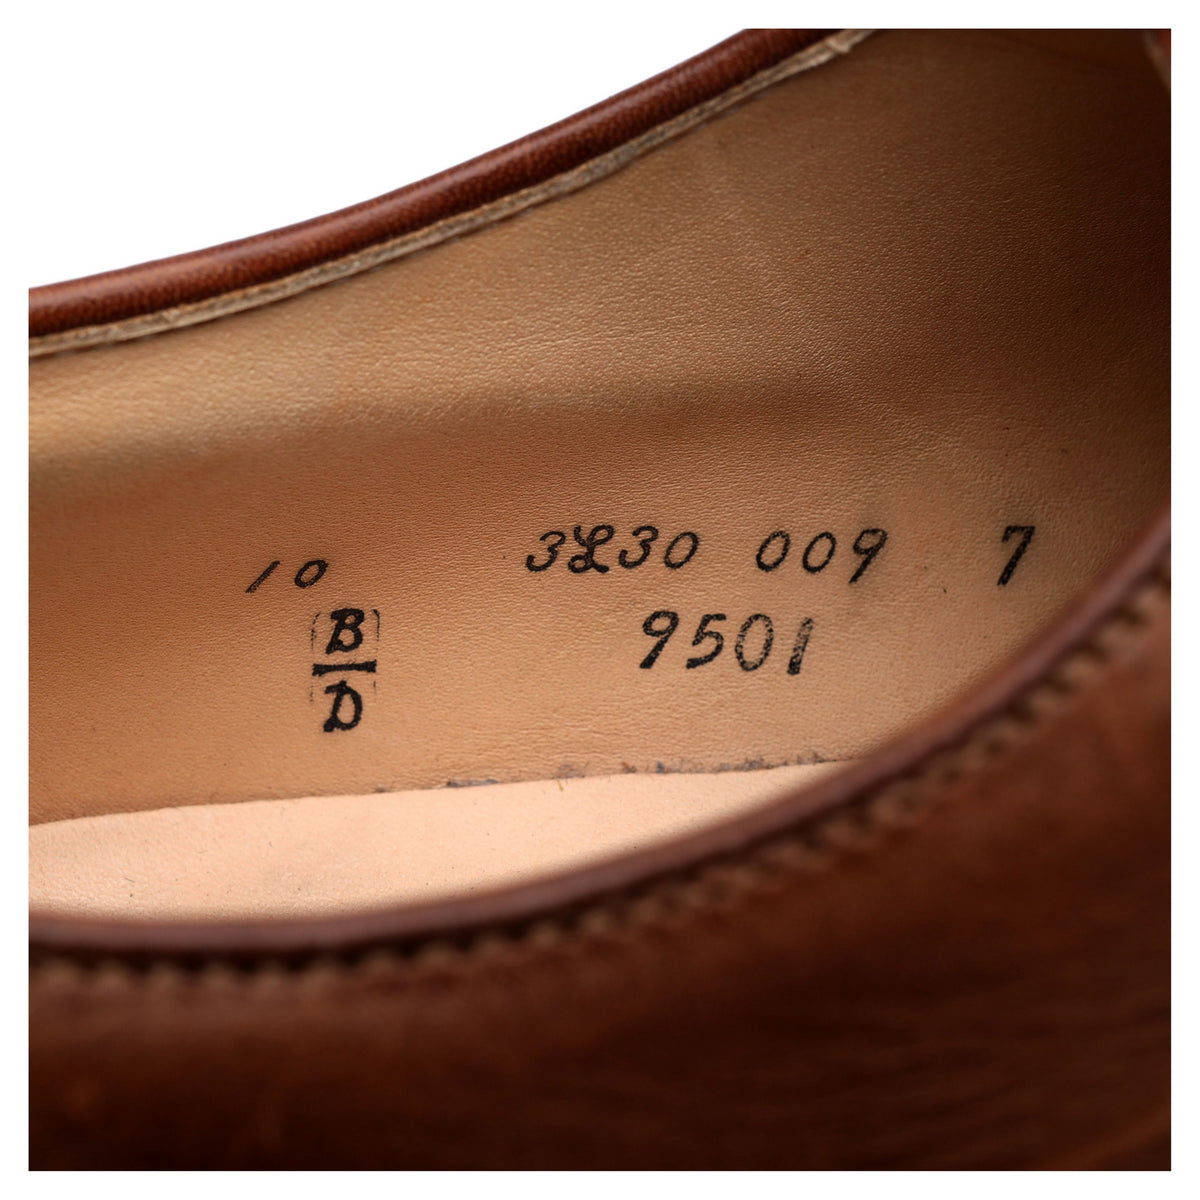 &#39;9501&#39; Brown Leather Derby UK 9.5 US 10 D